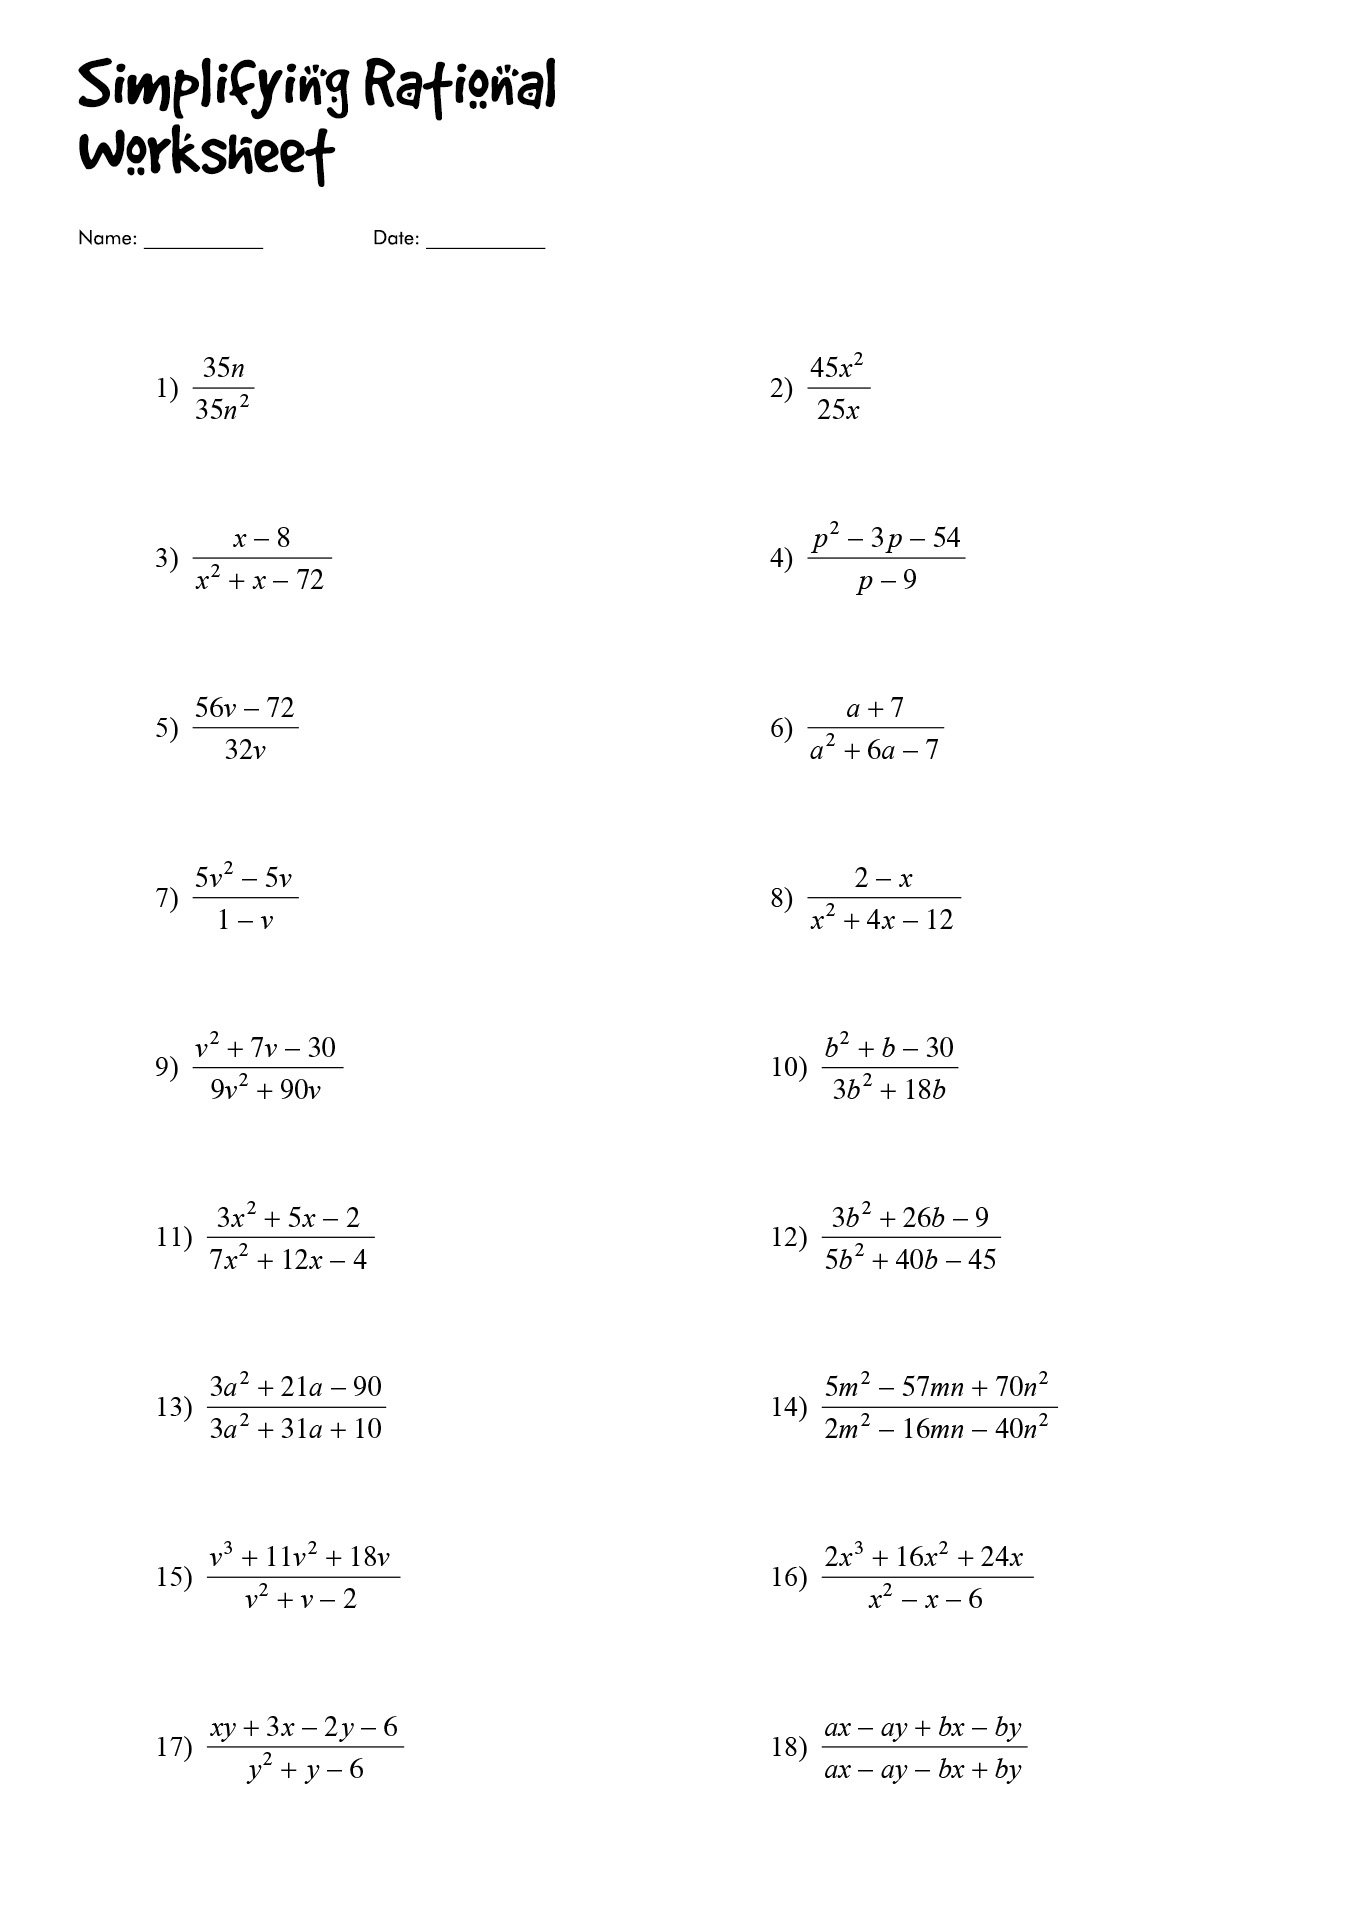 Simplifying Rational Expressions Worksheet Answers Image